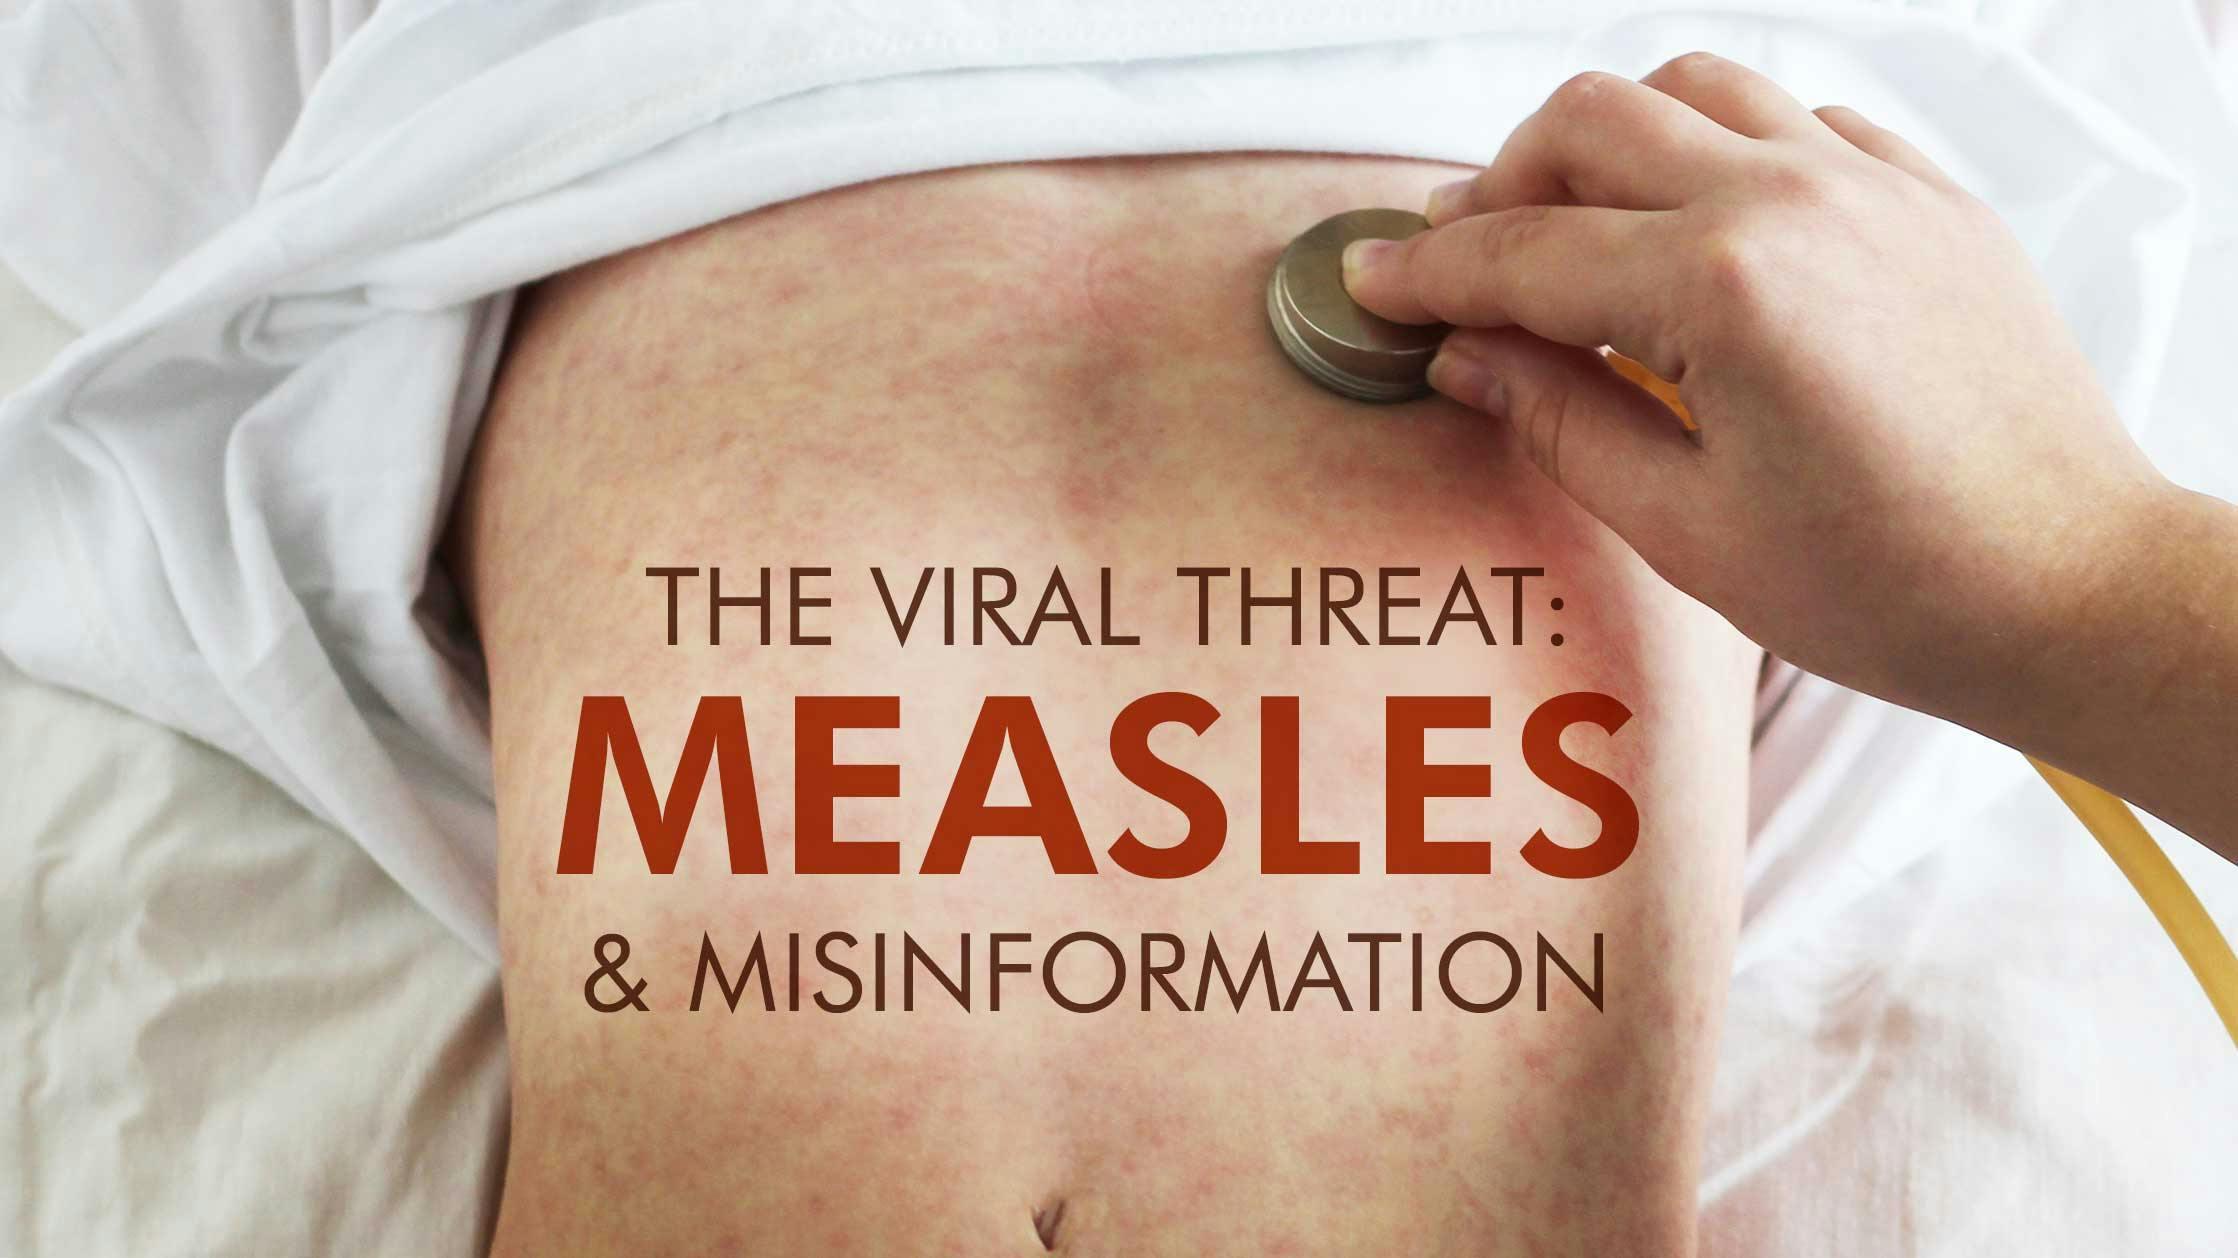 The Viral Threat: Measles and Misinformation